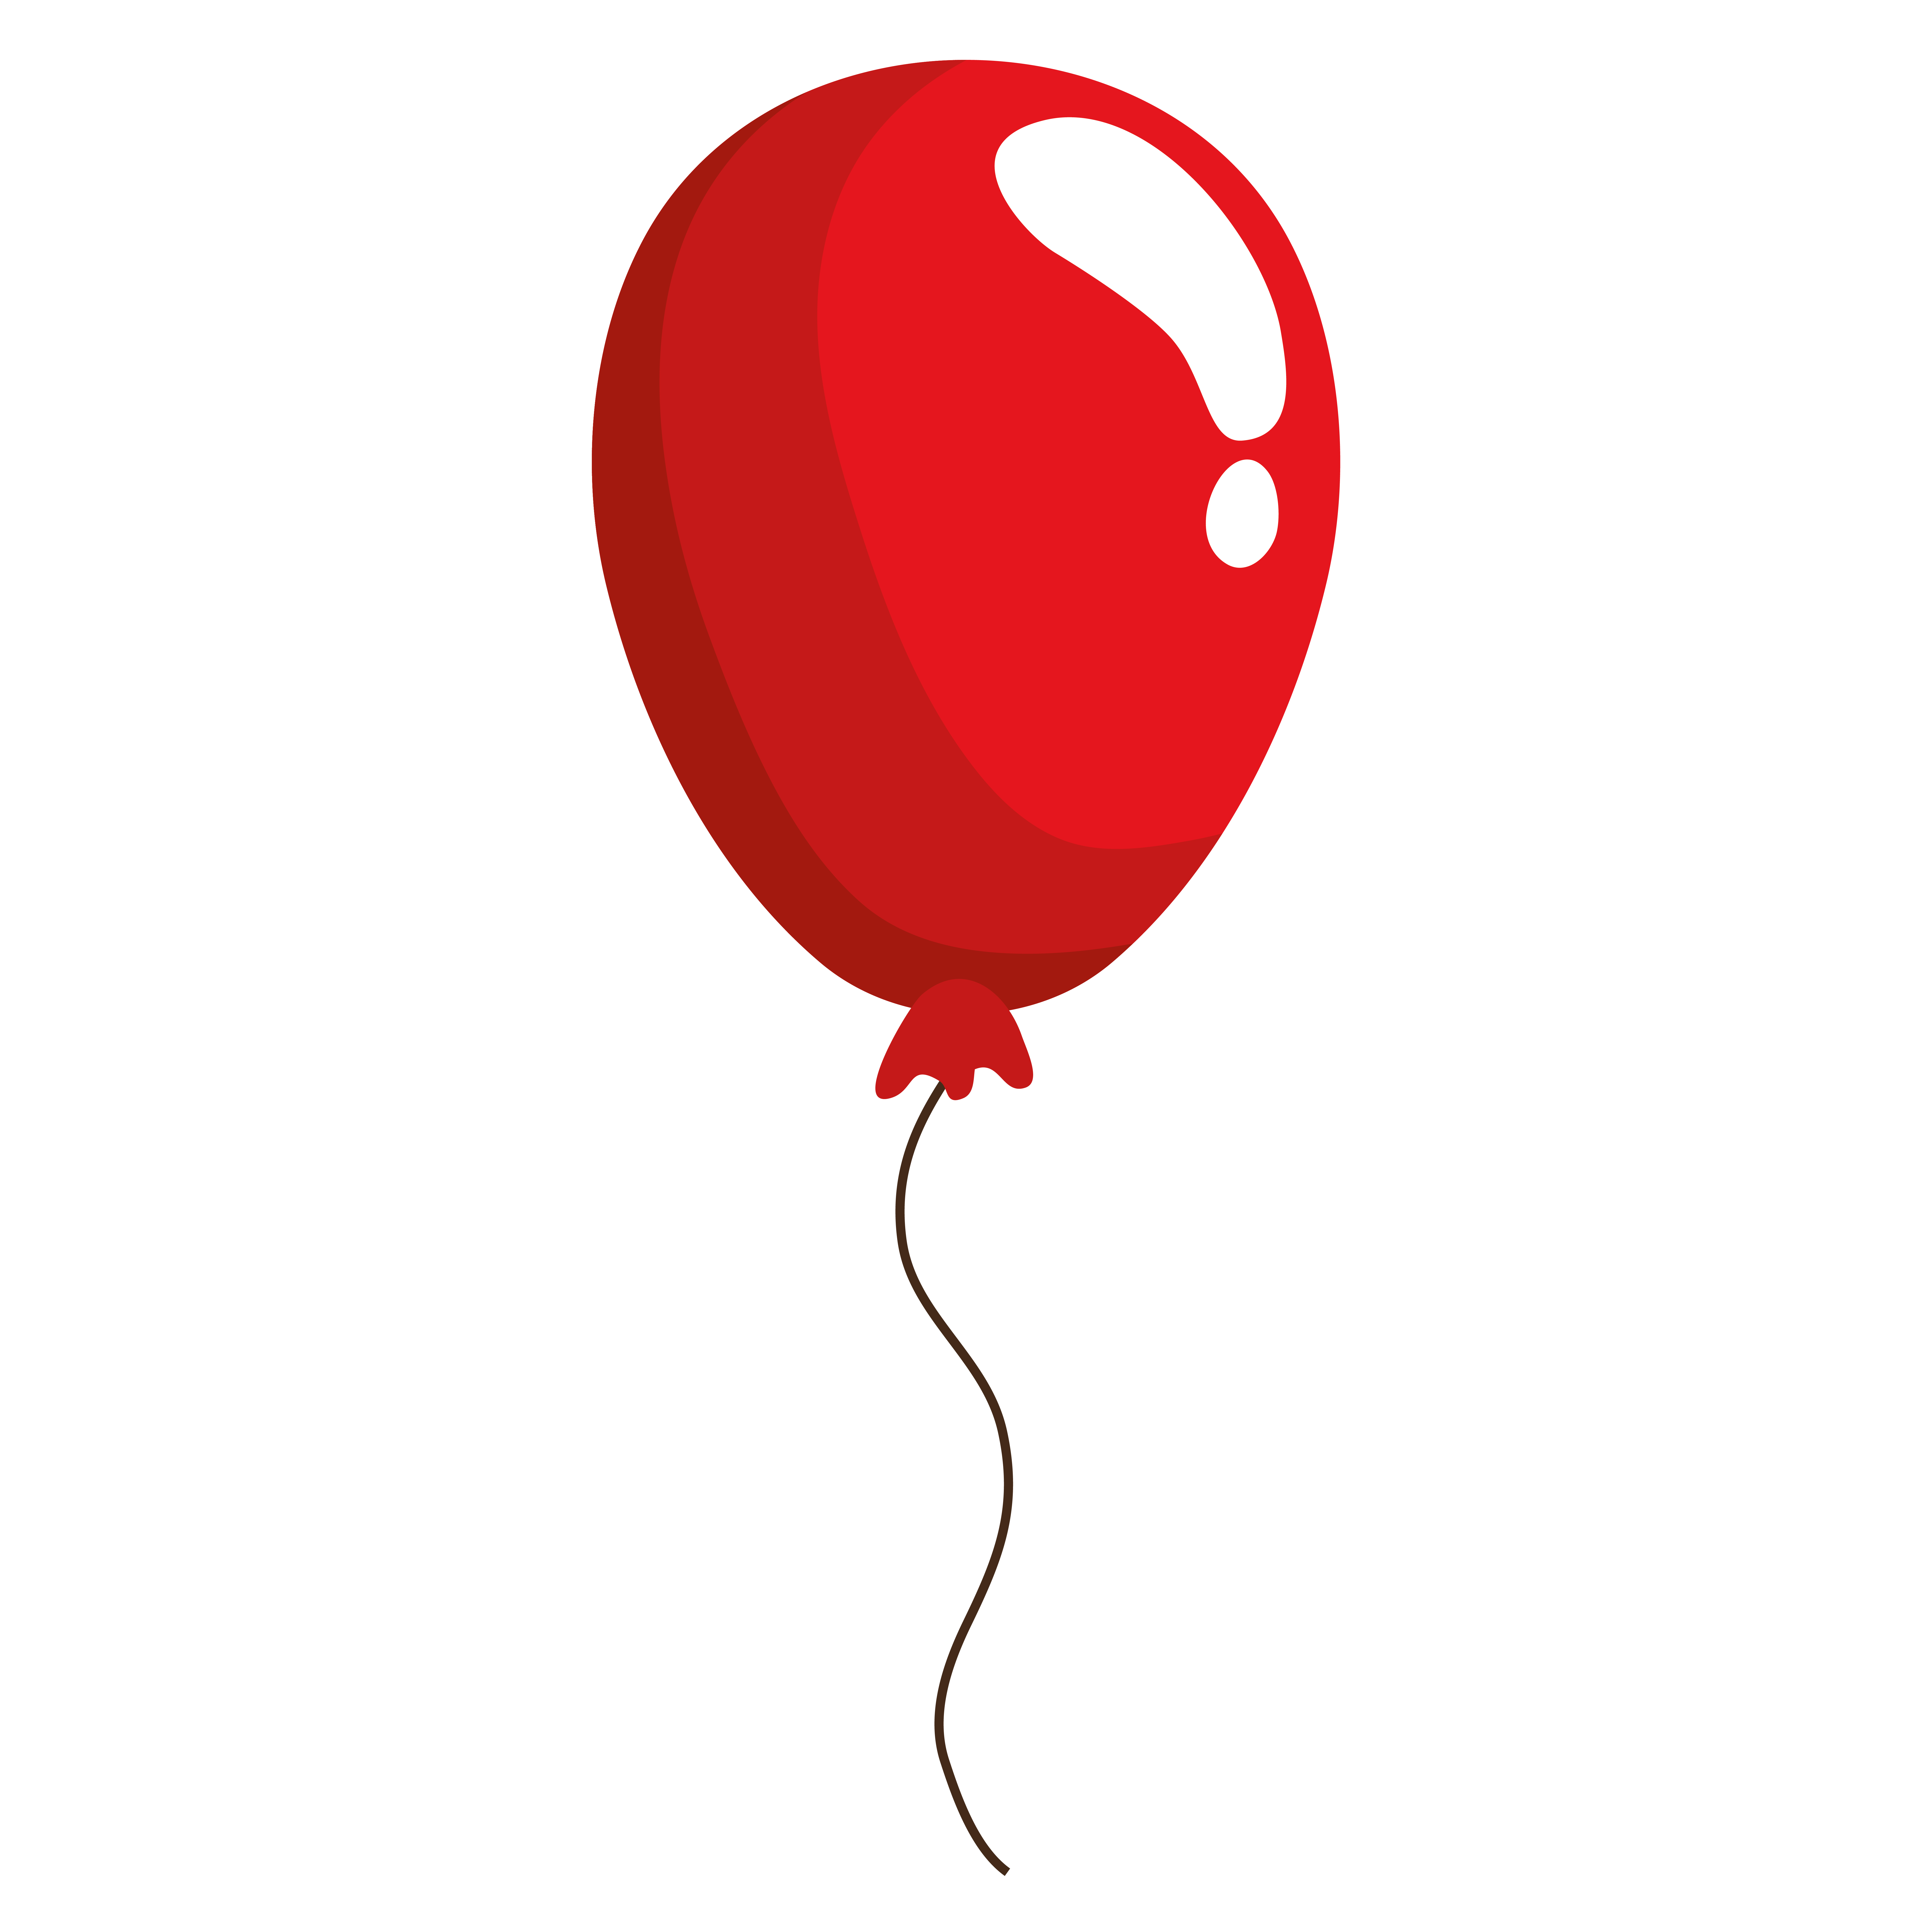 Red Balloon Art, Icons, and Graphics for Free Download